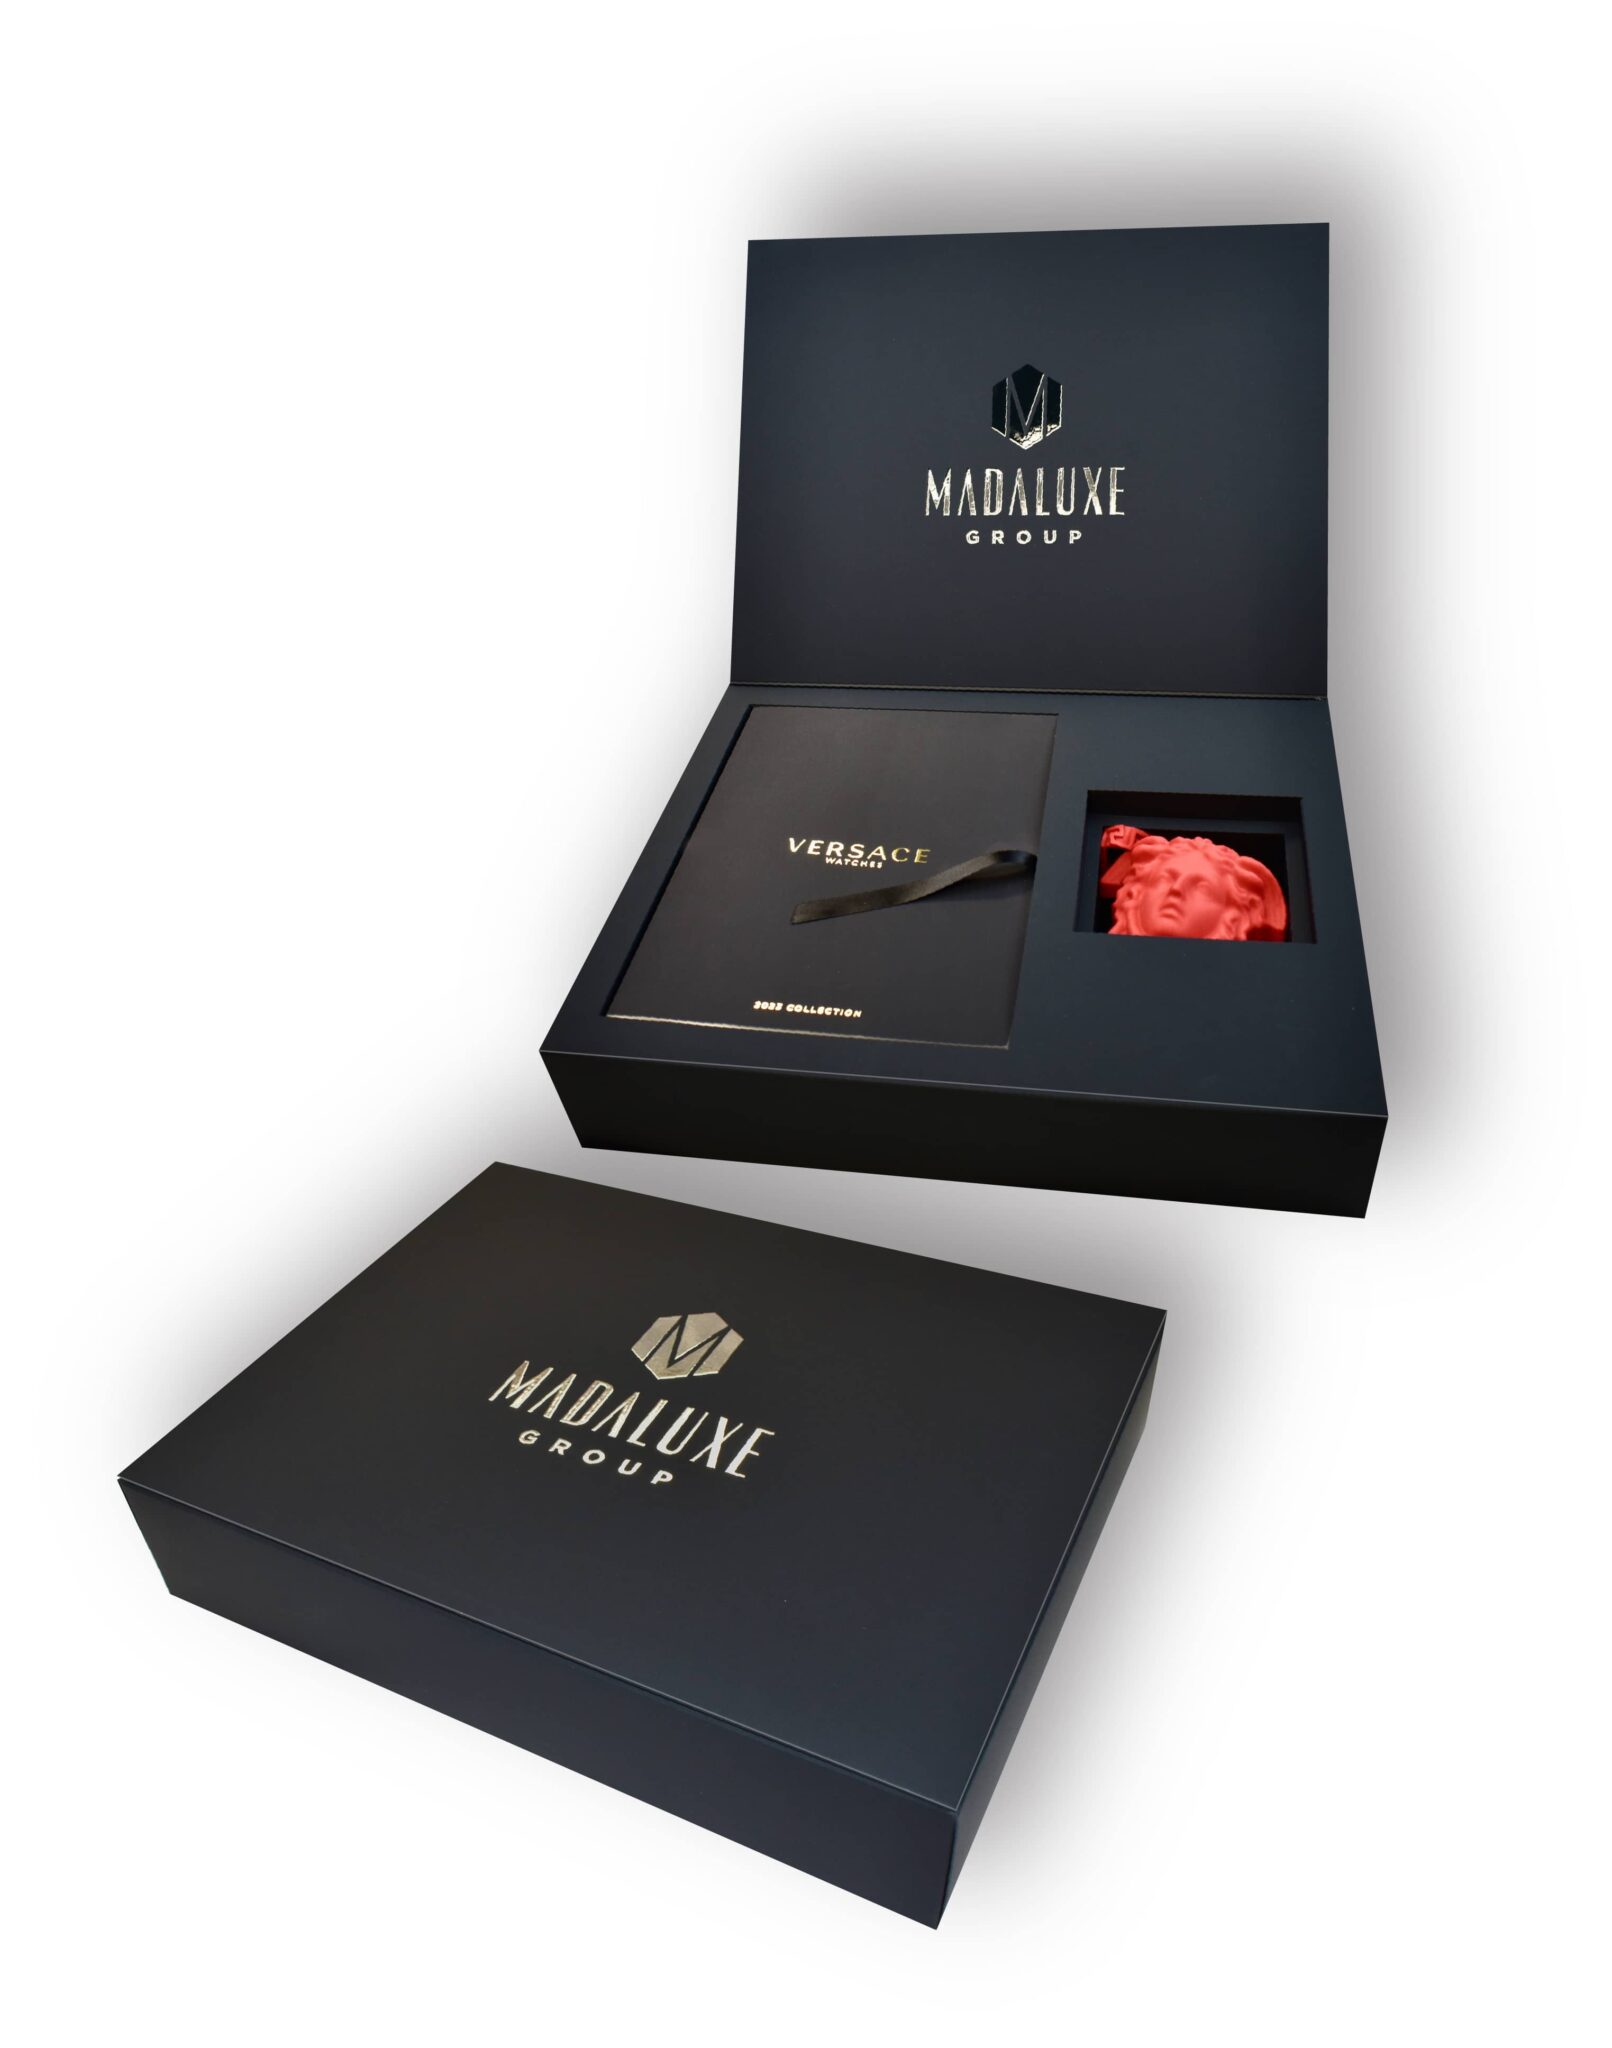 An open luxury gift box with the "MadaLuxe Group" logo, containing a Versace-branded item and a red, textured fabric, alongside a closed box.